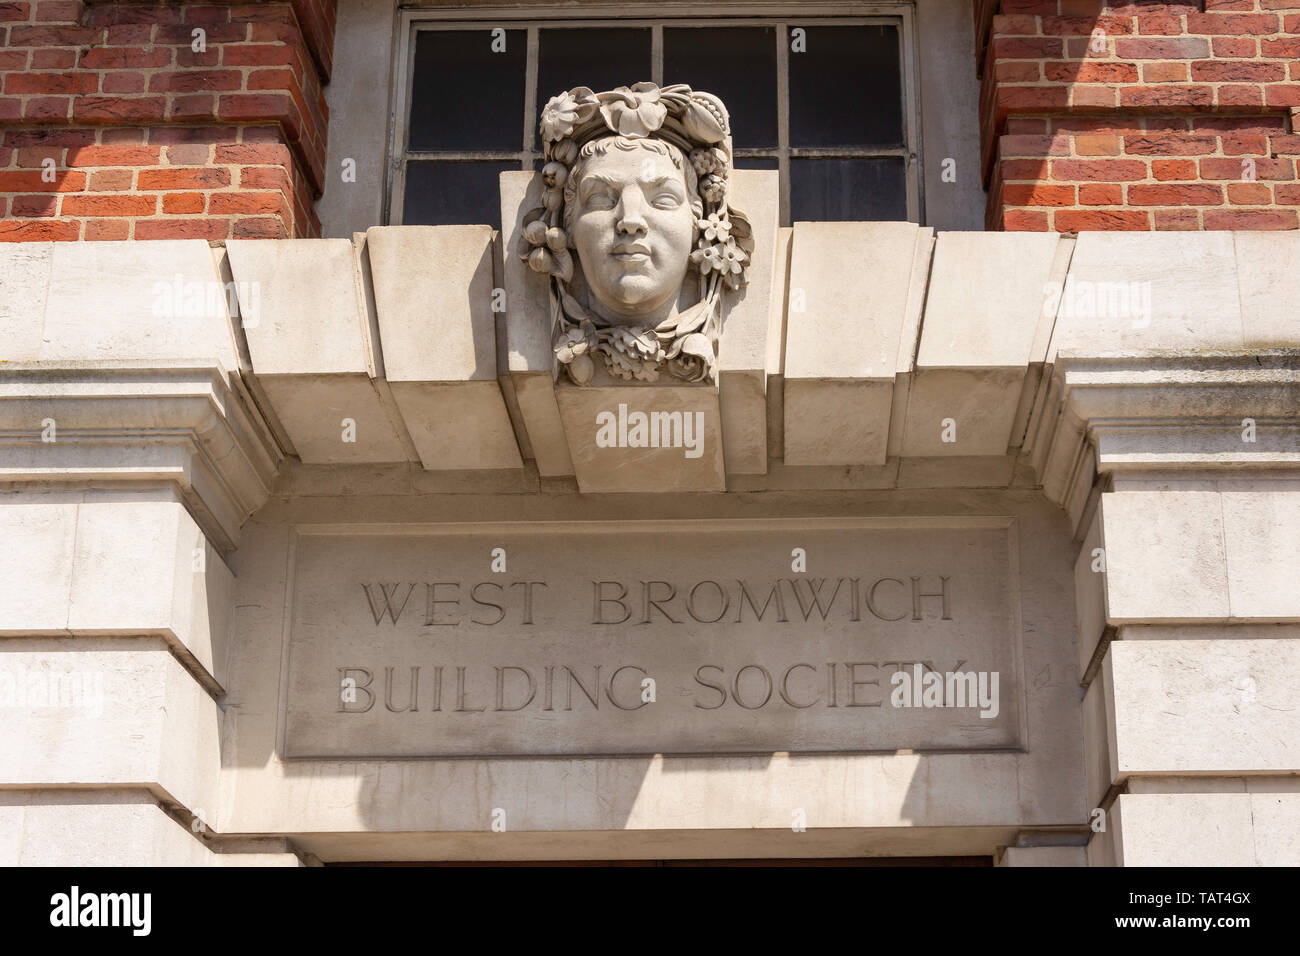 Entrance to West Bromwich Building Society, High Street, West Bromwich, West Midlands, England, United Kingdom Stock Photo